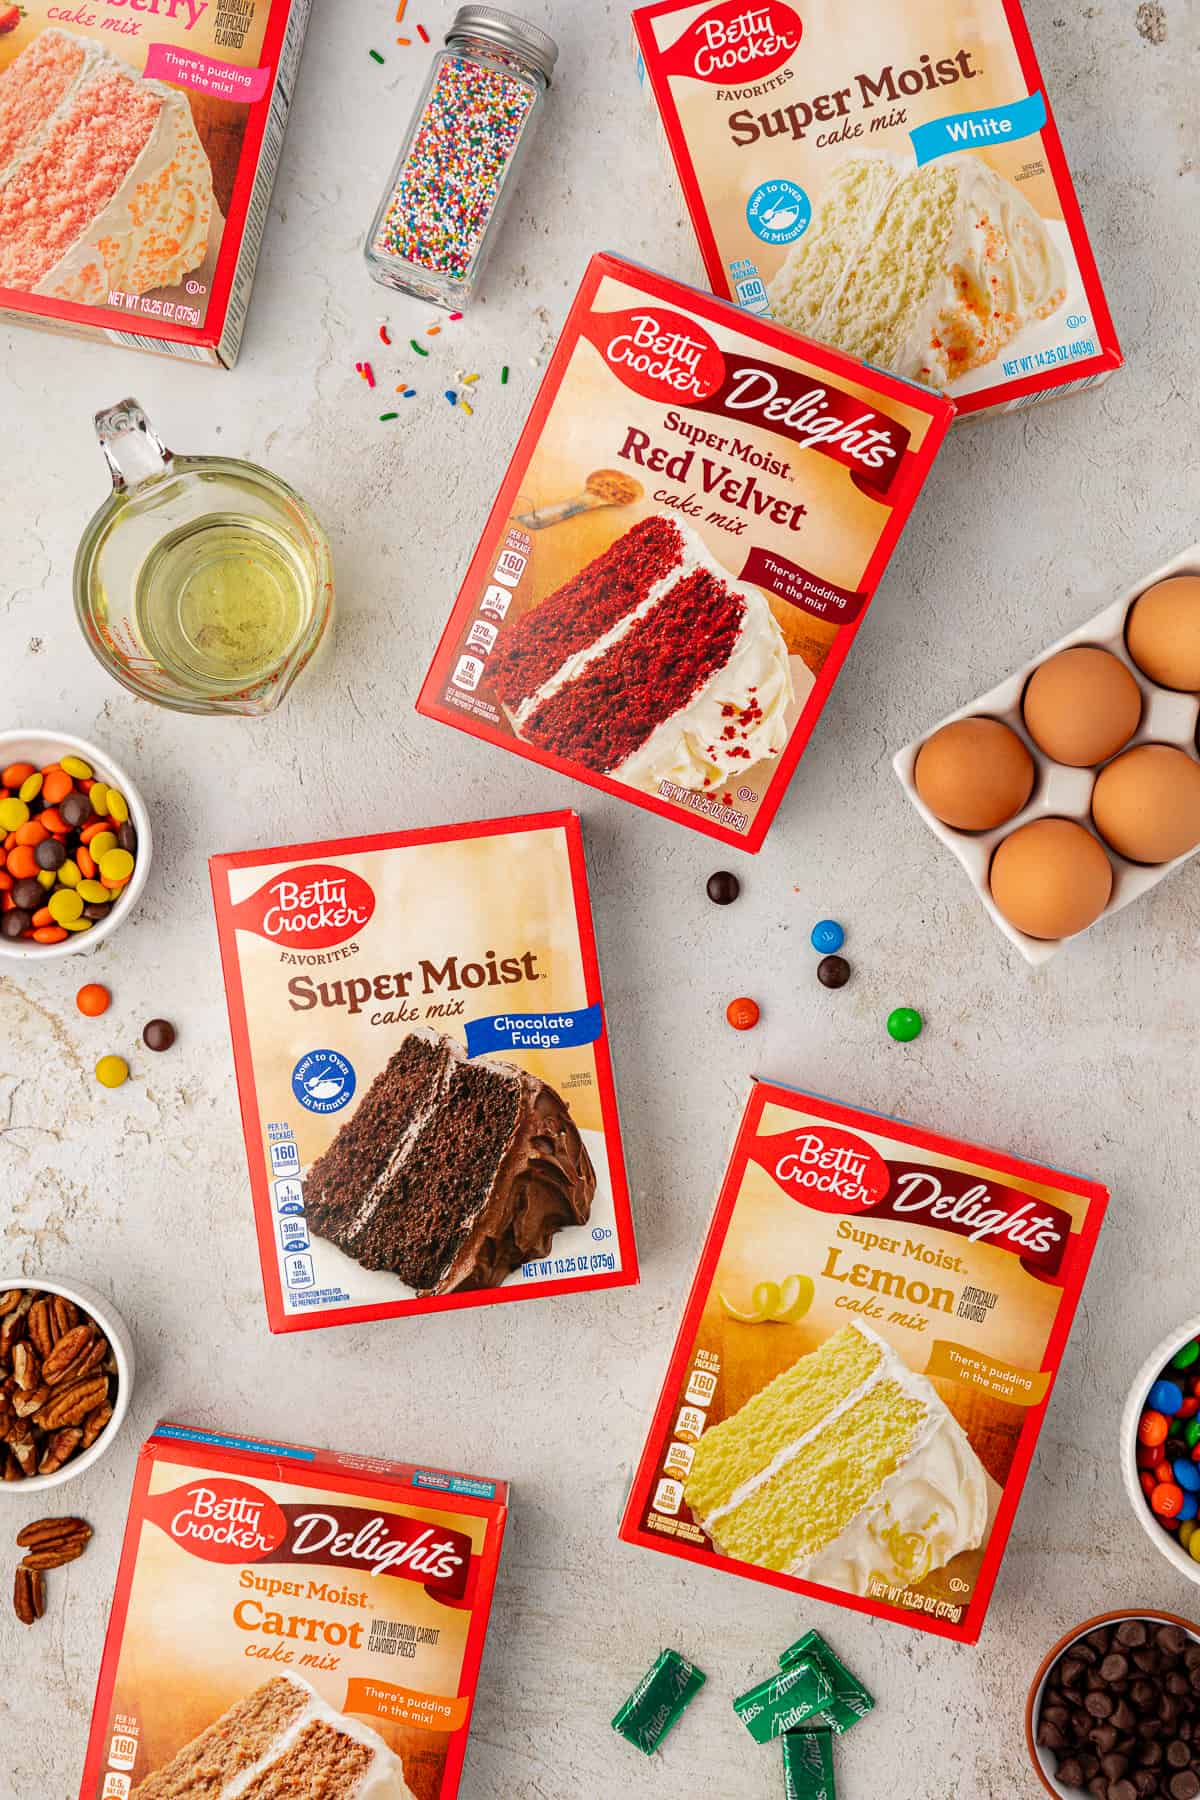 ingredients for cake mix cookies including vegetable oil, strawberry cake mix, white cake mix, red velvet cake mix, chocolate cake mix, lemon cake mix, eggs, m&ms, nuts, reese's pieces, sprinkles and andes mints